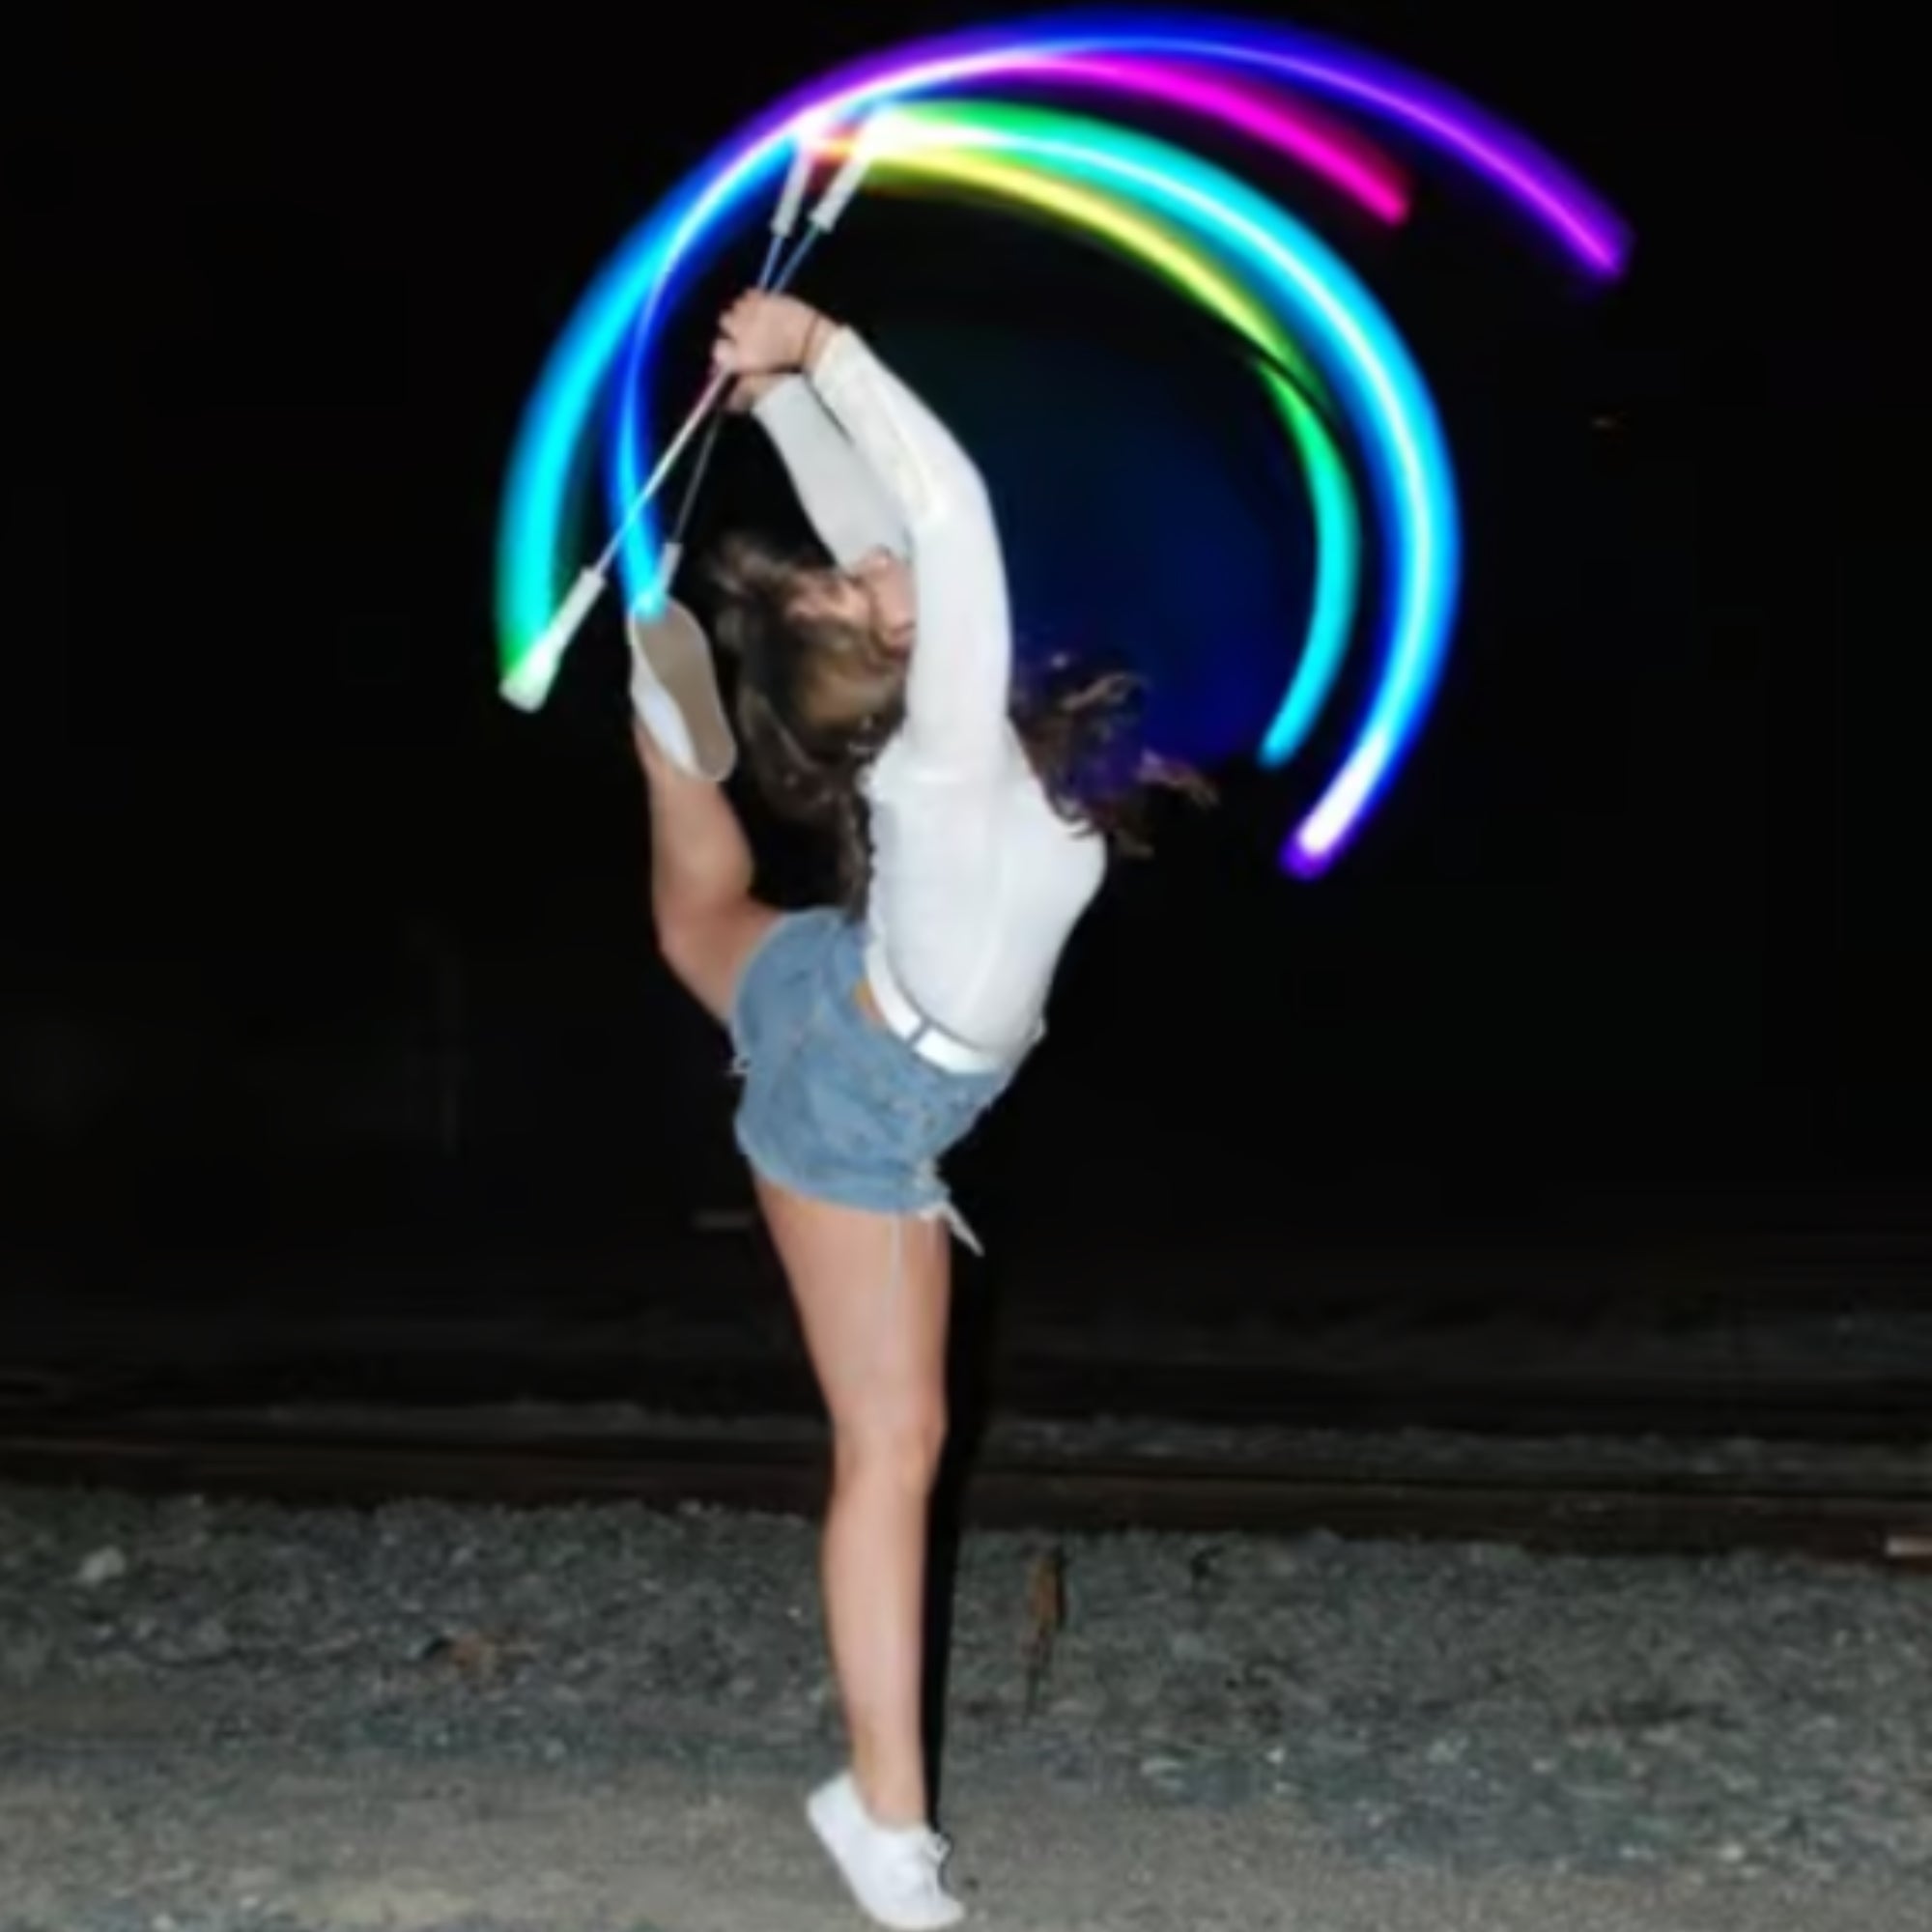 a person spinning 2 batons with light trails